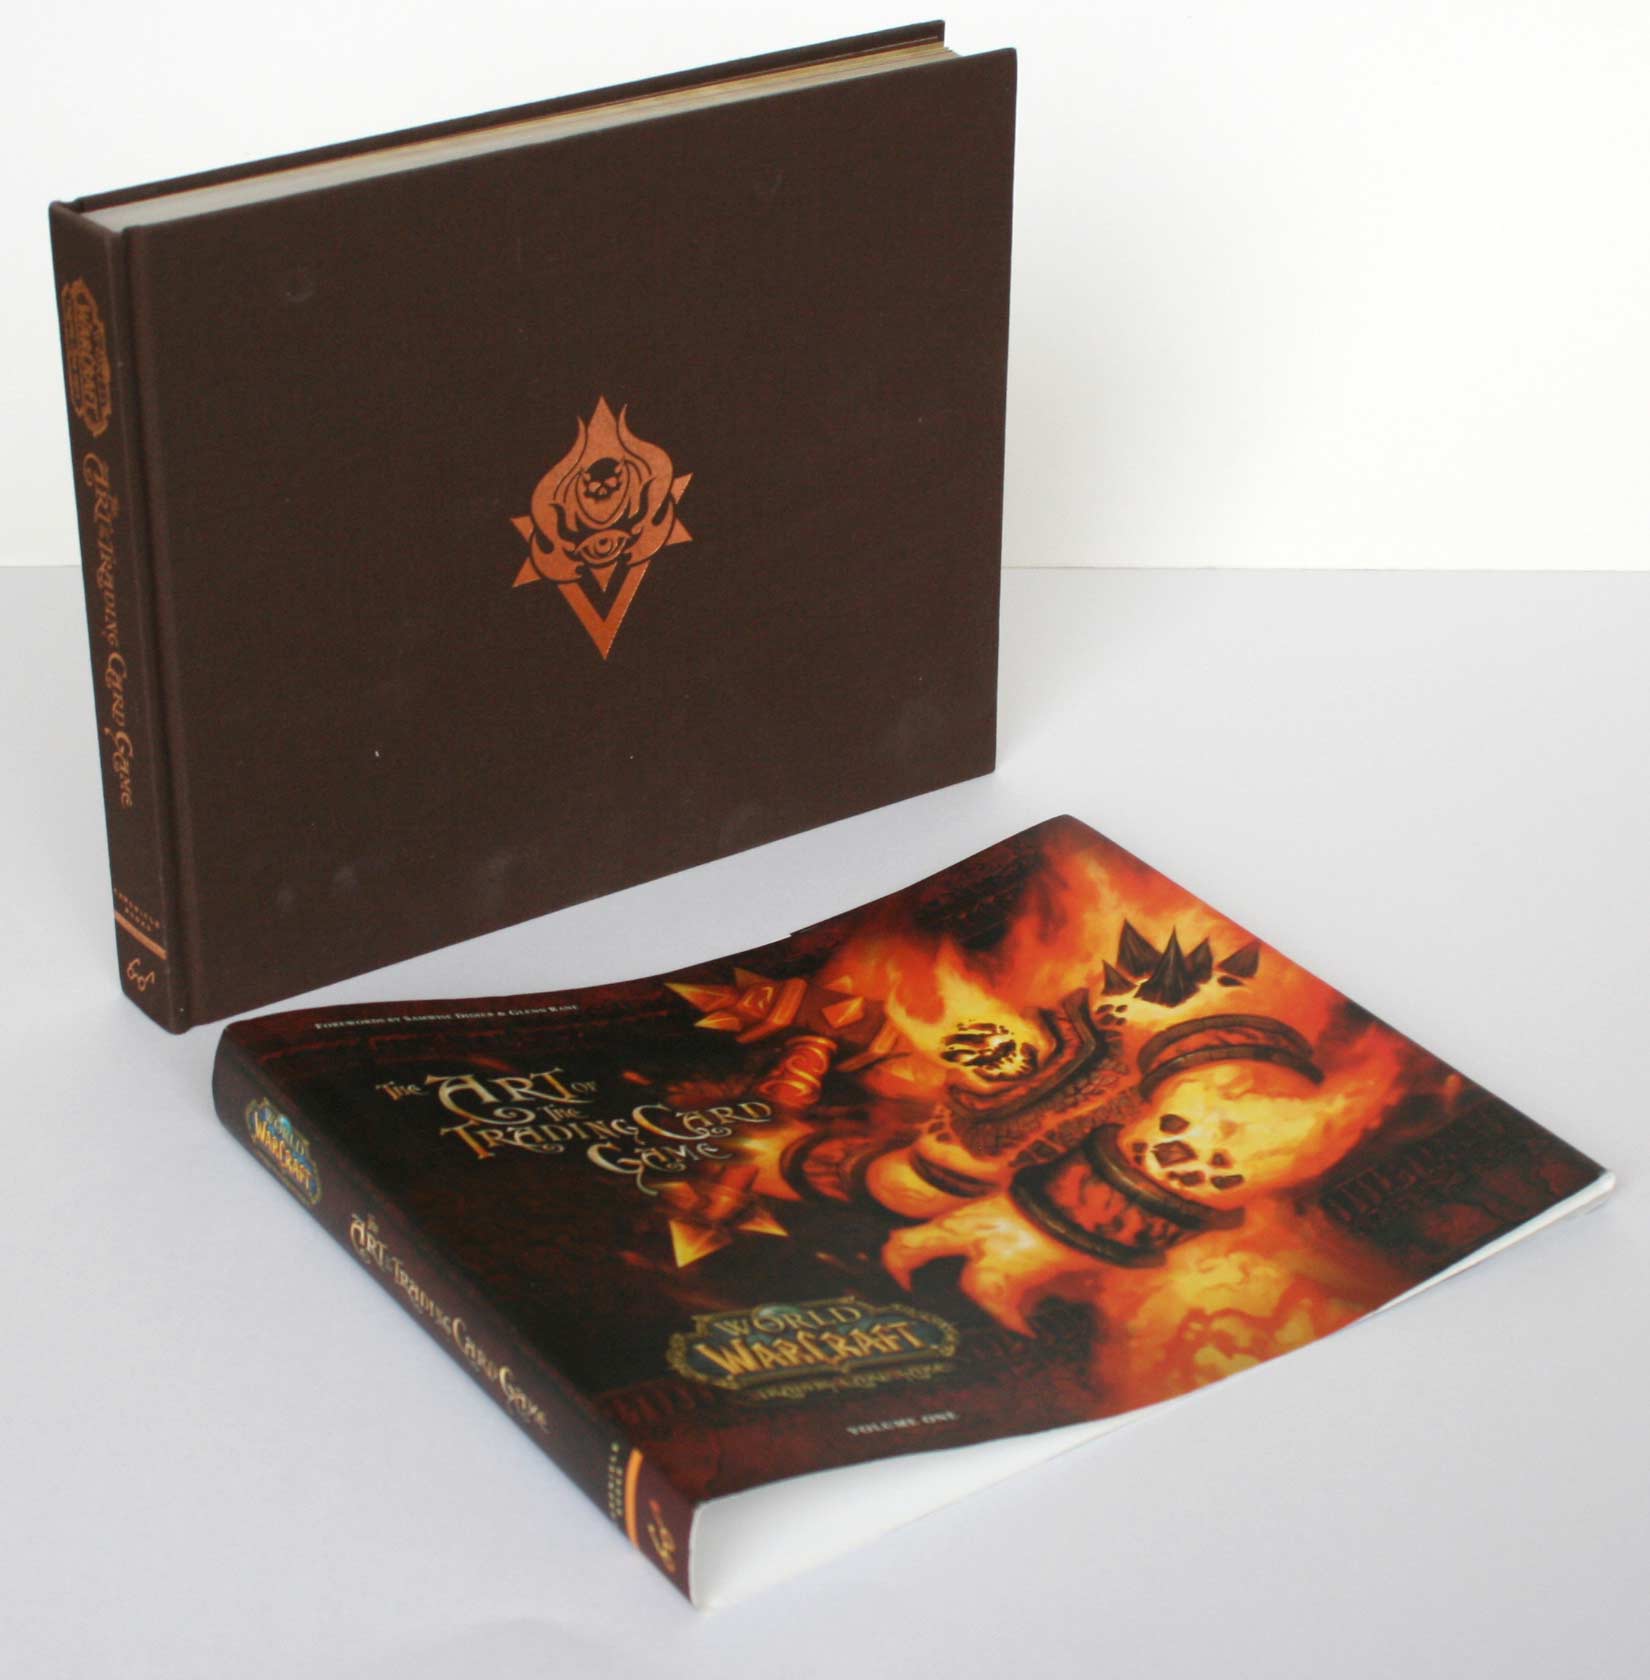 World of Warcraft : The Art of the Trading Card Game (Art book) - couverture de protection enlevée